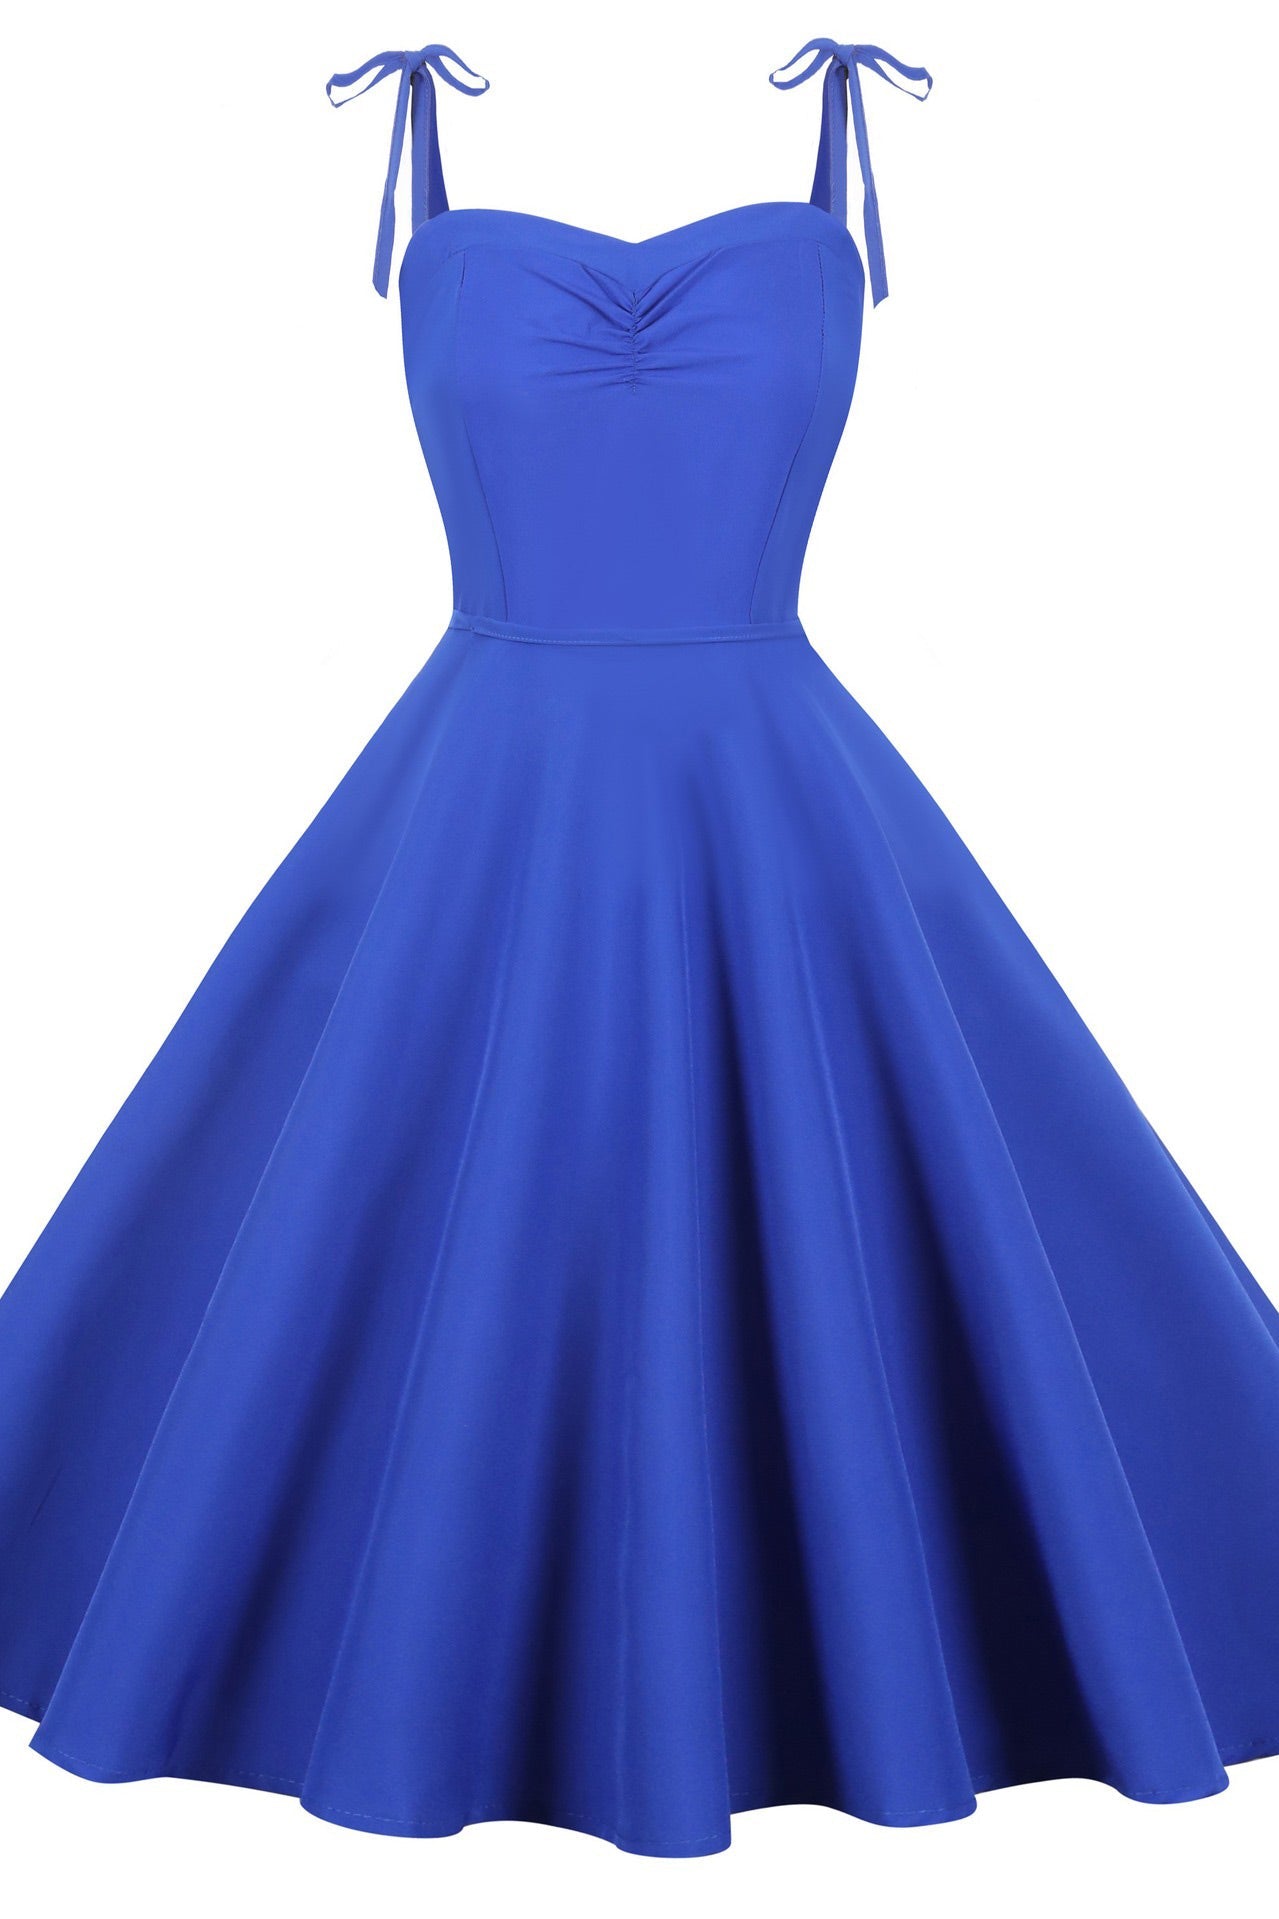 Royal Blue A-Line Sleeveless Cocktail Party Dress